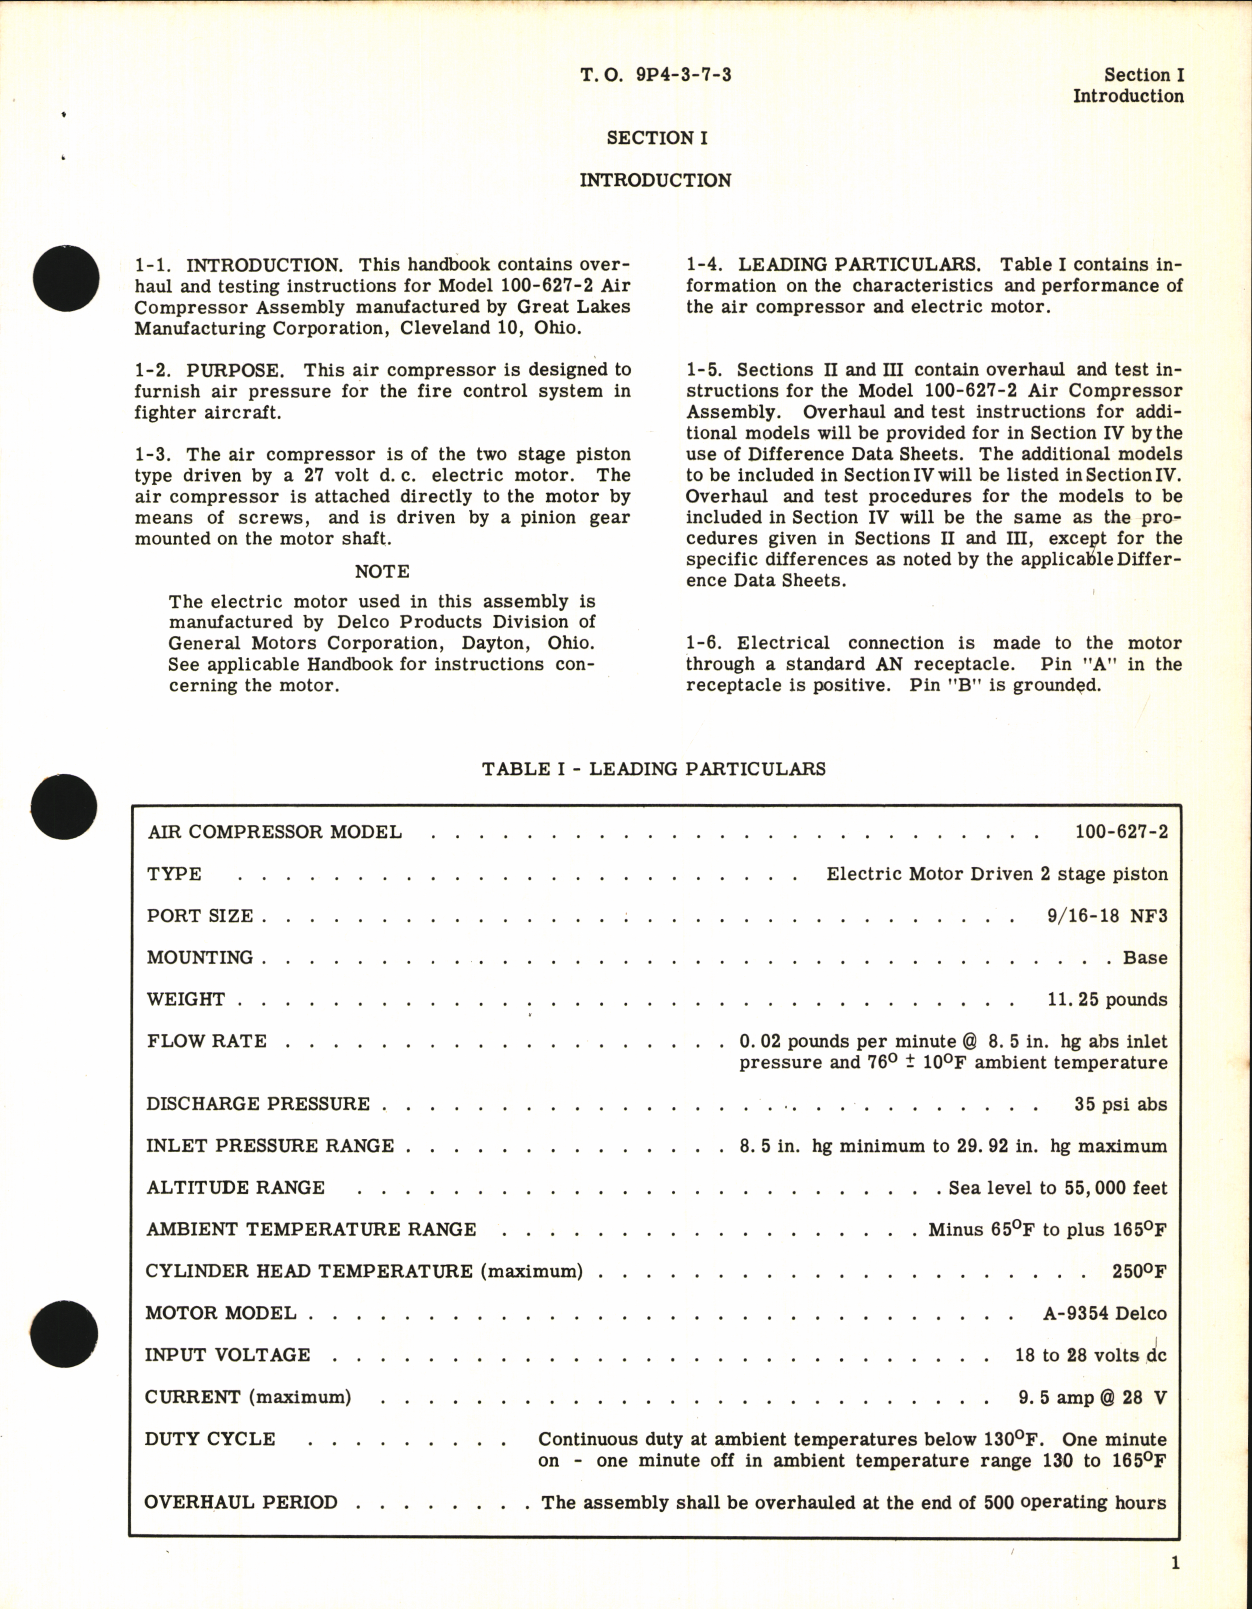 Sample page 5 from AirCorps Library document: Handbook of Instructions for Air Compressor Model 100-627-2